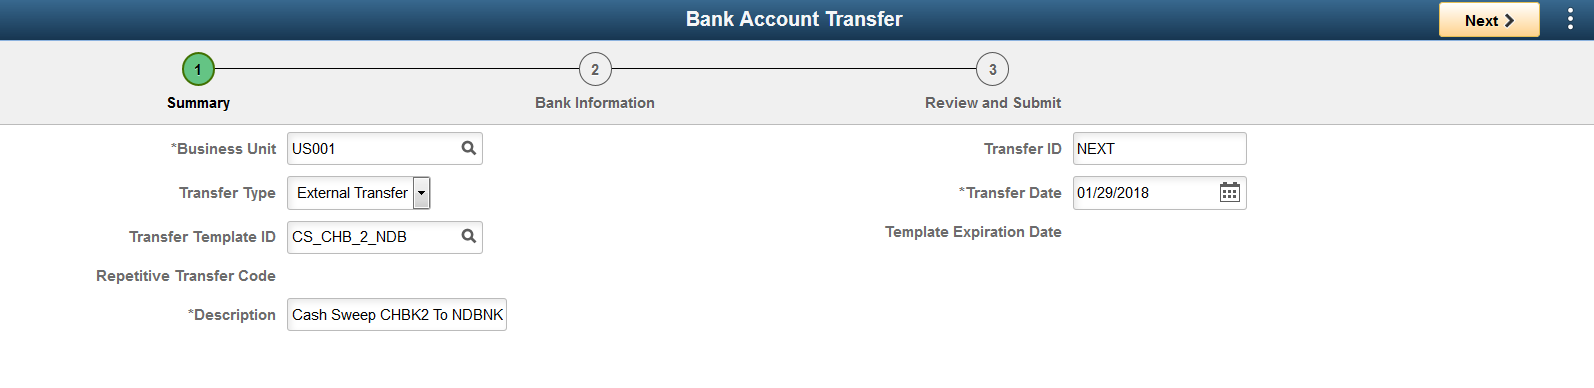 Bank Account Transfer - Summary Page